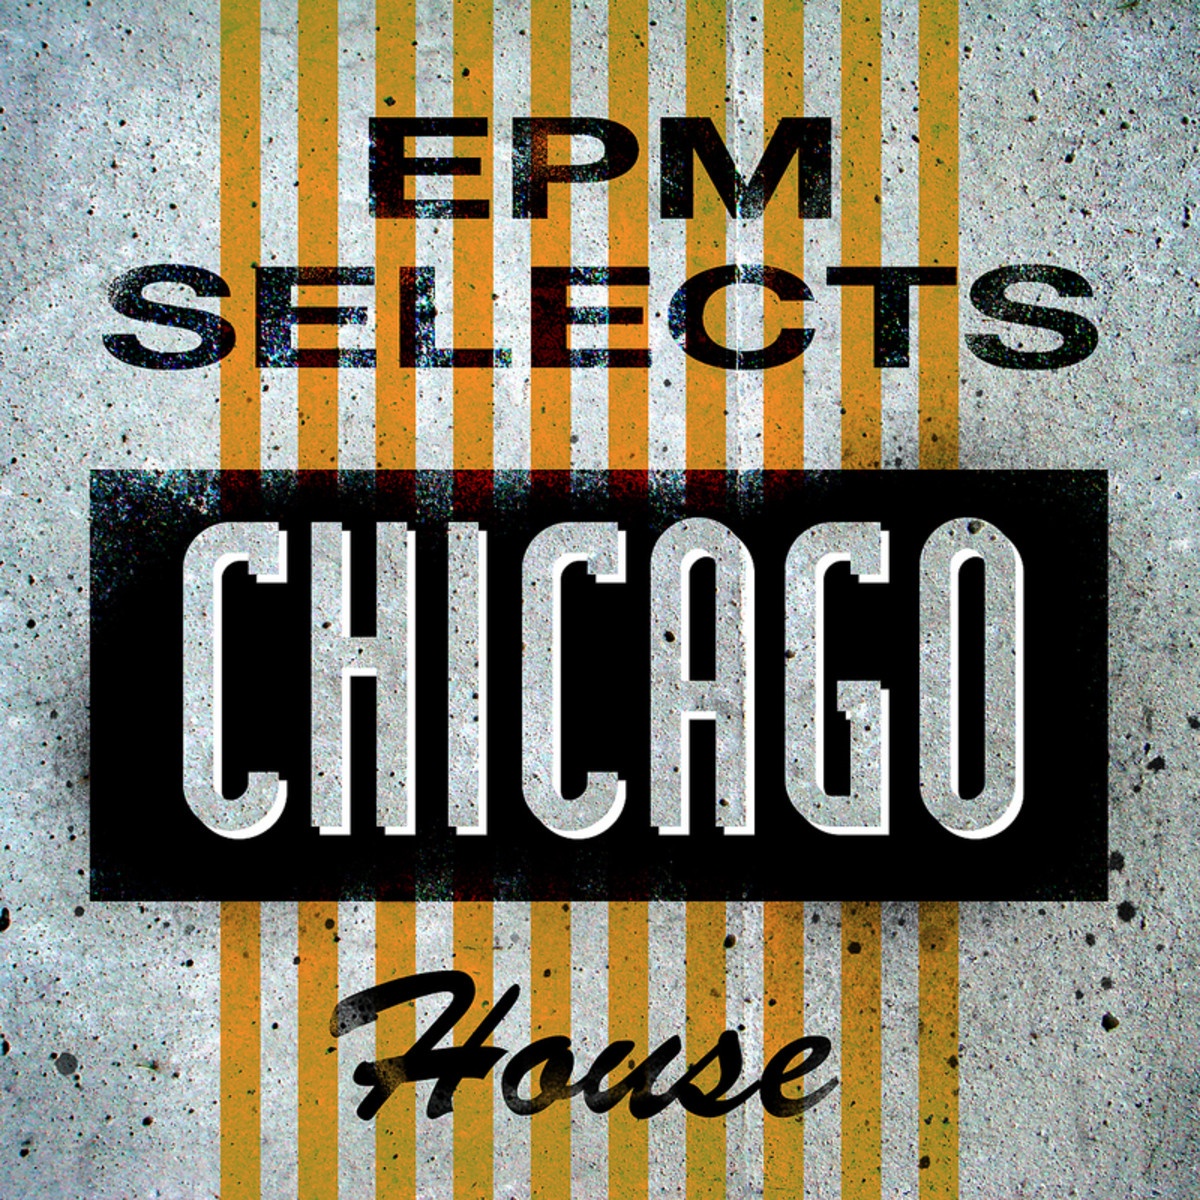 I Can Go    Chicago House Mx1 Full Length  by K Alexi Shelby